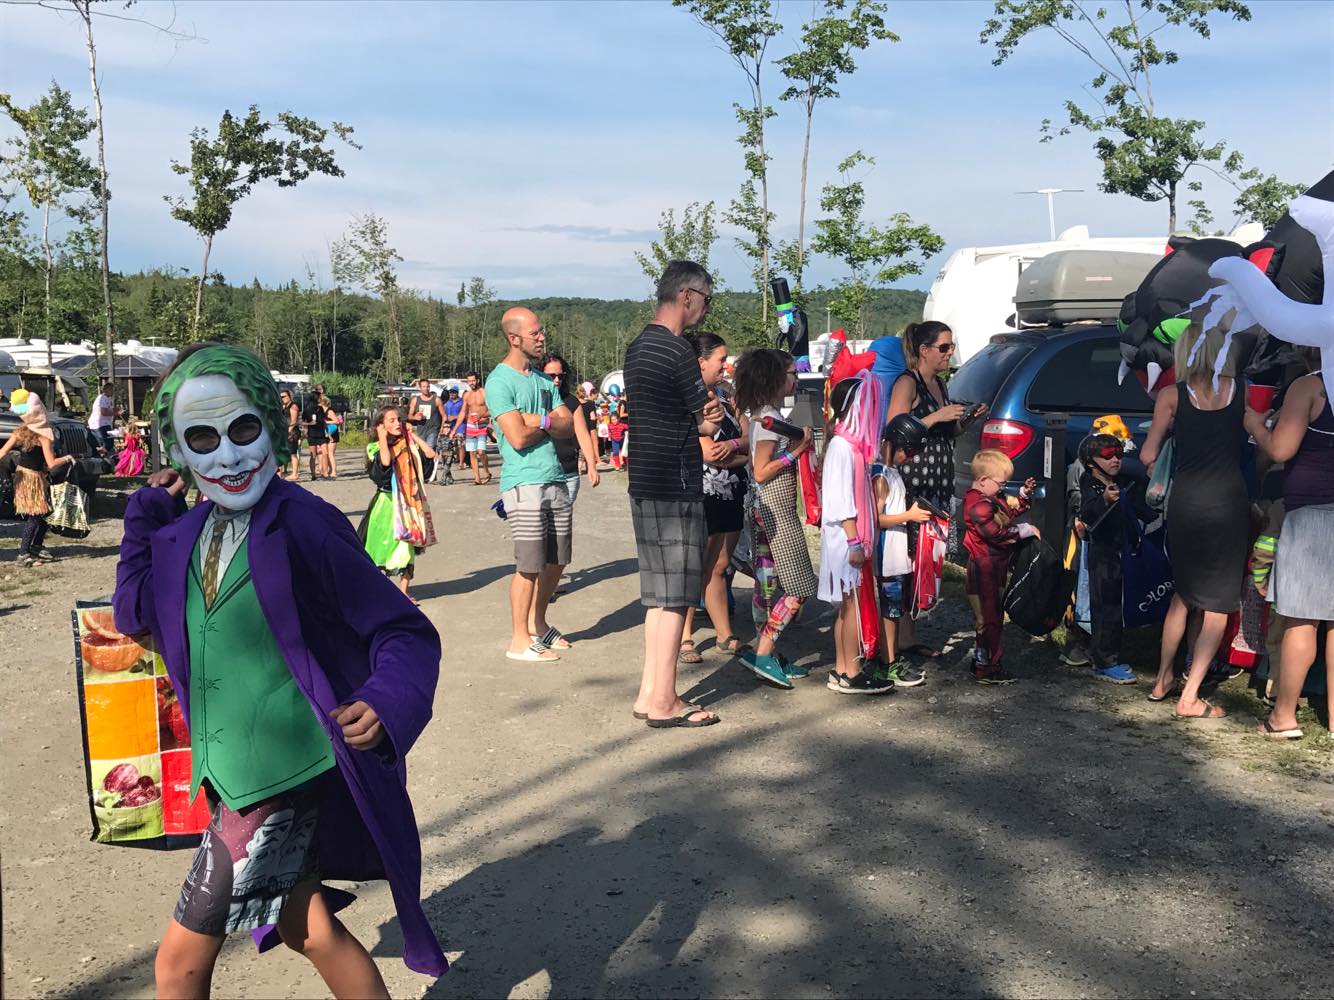 http://www.familycampgrounds.ca/wp-content/uploads/2018/08/halloween-complexe-atlantide-2018-21.jpg